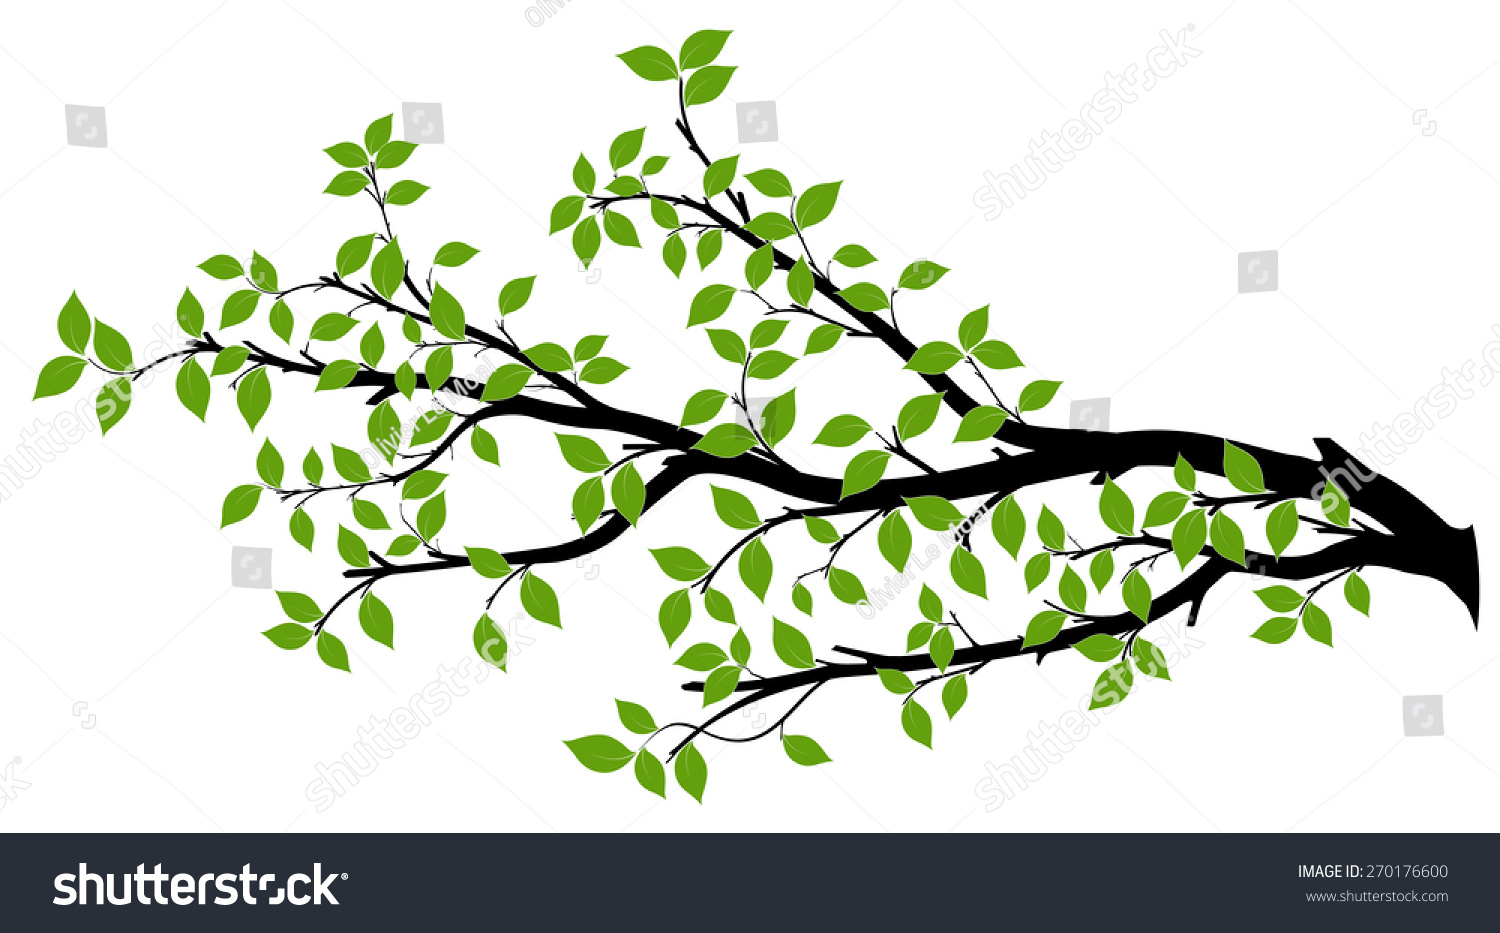 Tree branch with green leaves over white background. Vector graphics. Artwork design element. #270176600